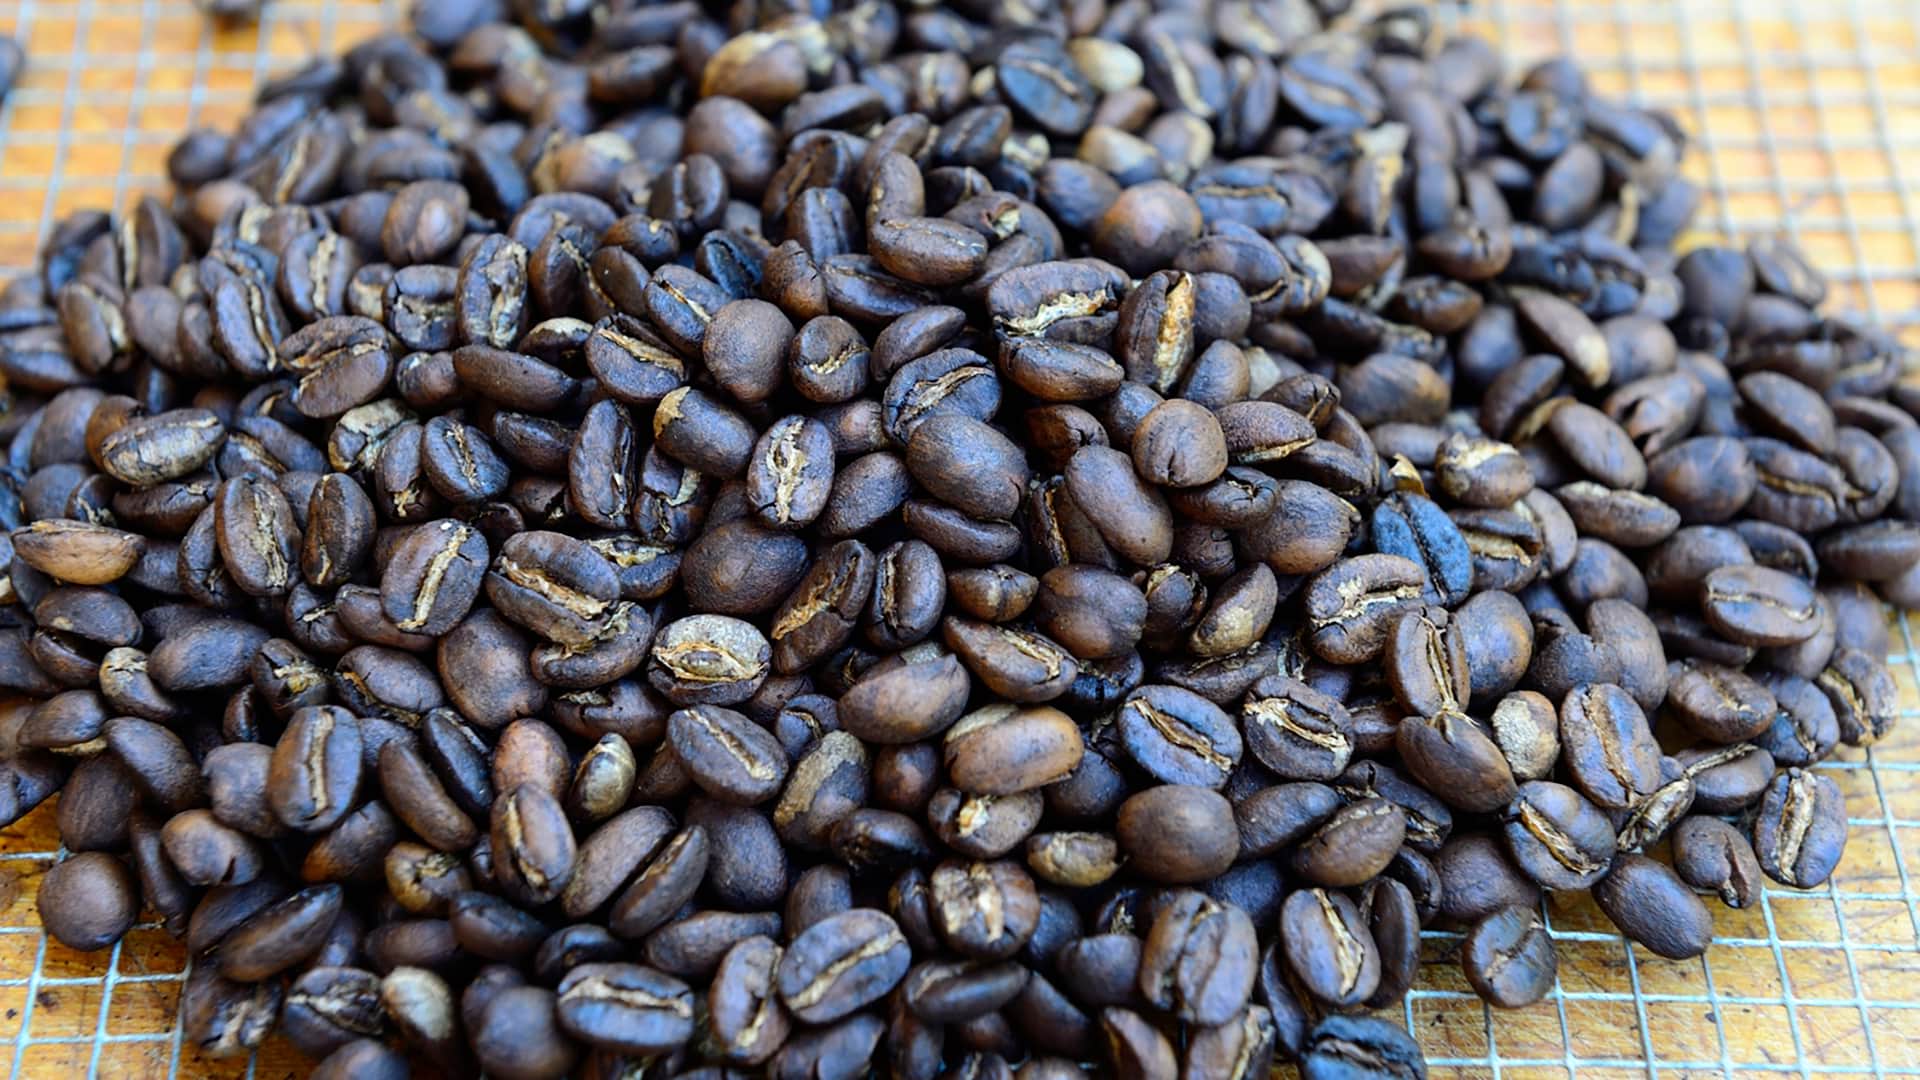 Traditionally roasted coffee beans. Coffee Route to Machu Picchu - RESPONSible Travel Peru